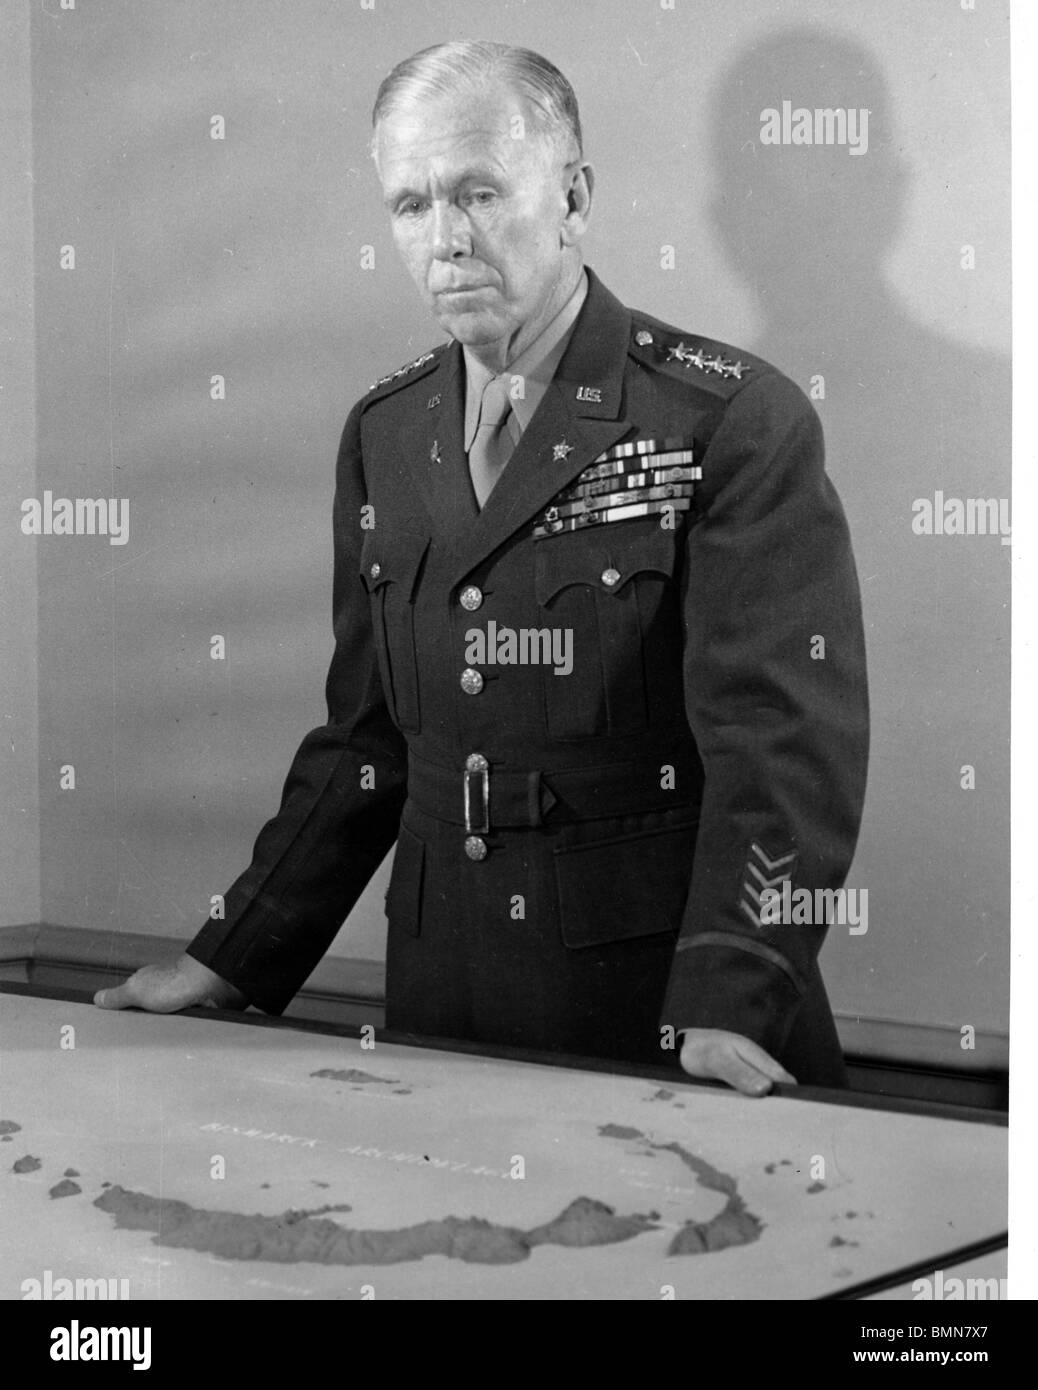 GEORGE C MARSHALL - US Chief of Staff in November 1943 Stock Photo